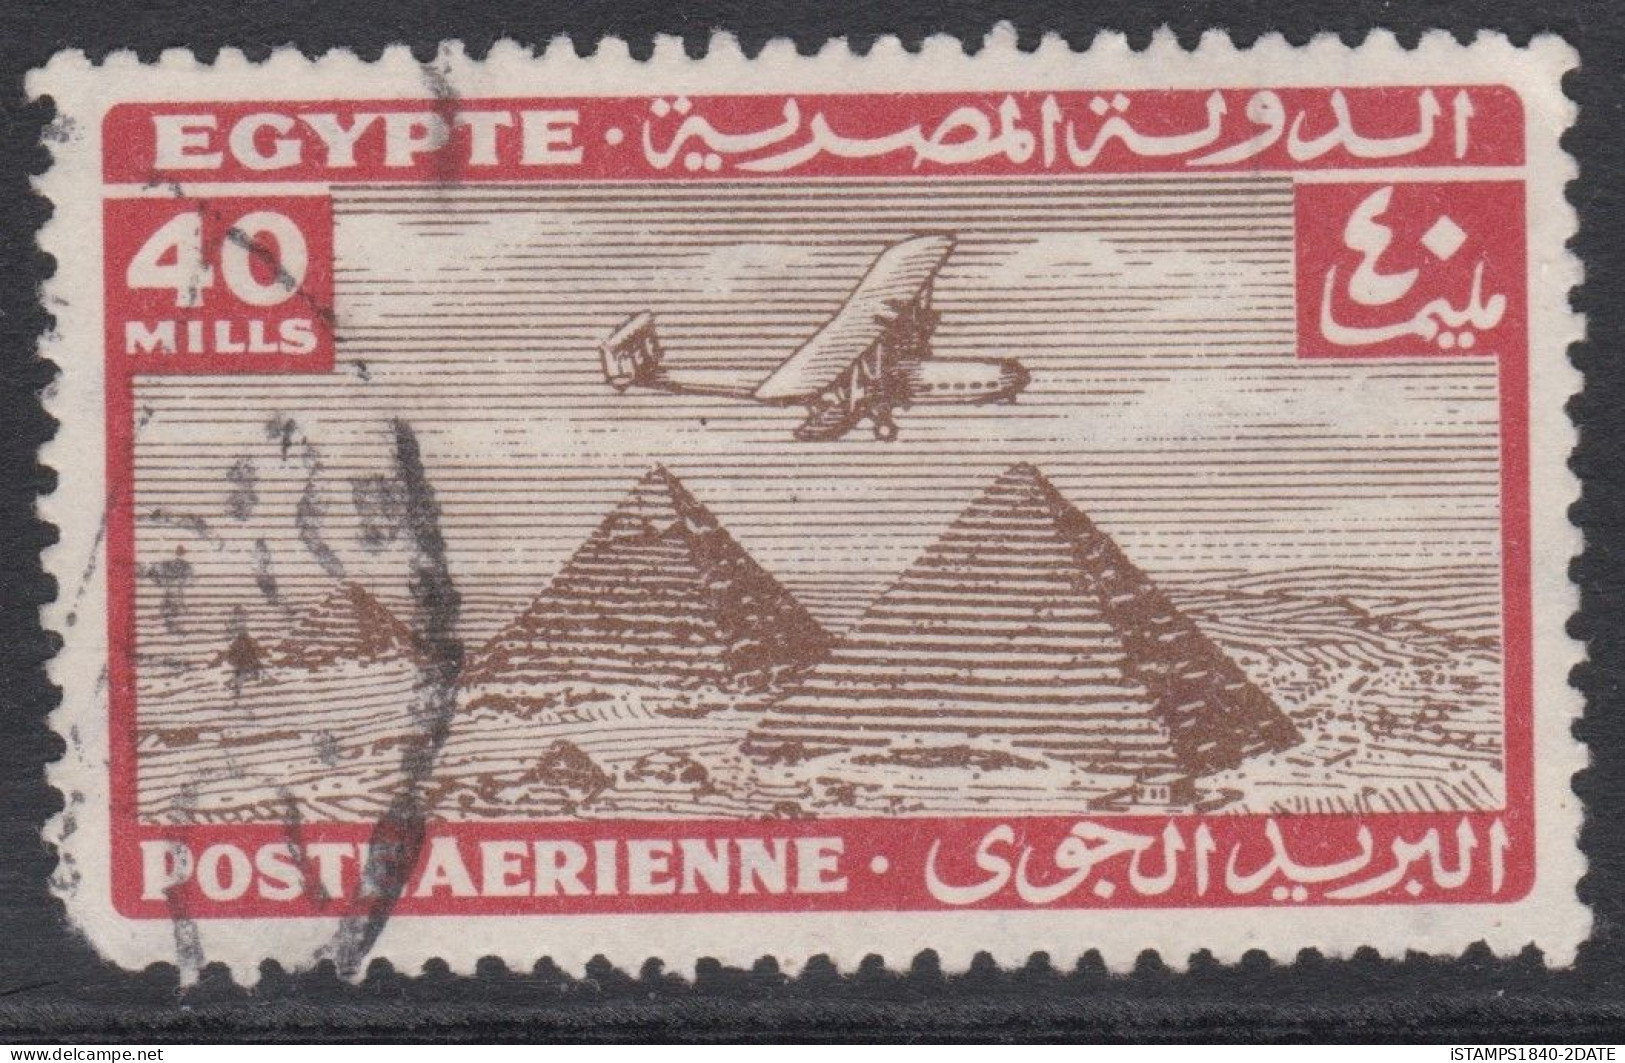 00680/ Egypt 1934/38 Air Mail 40m Used Plane Over Pyramid - Poste Aérienne